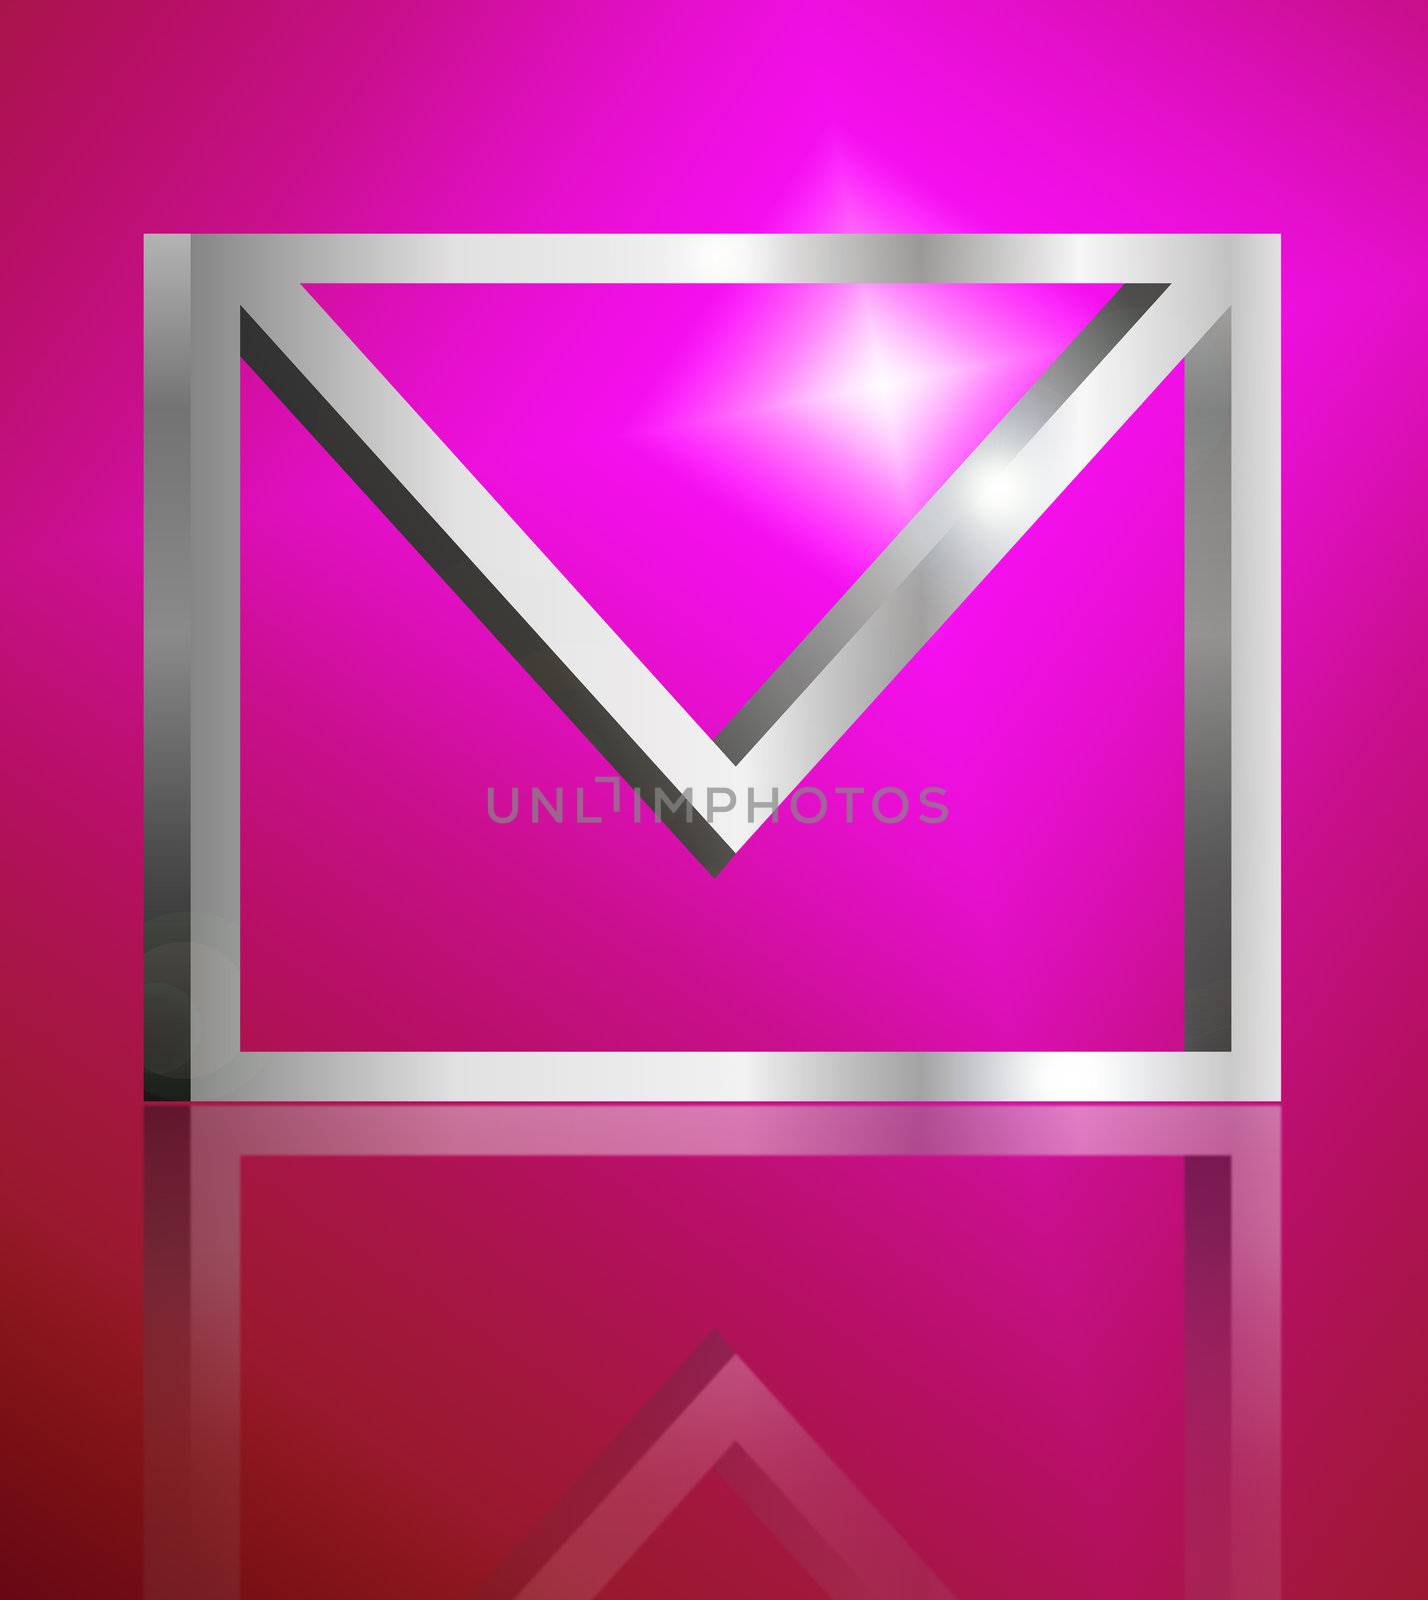 Illustration depicting a single metallic email symbol arranged over pink light effect and reflecting into foreground.